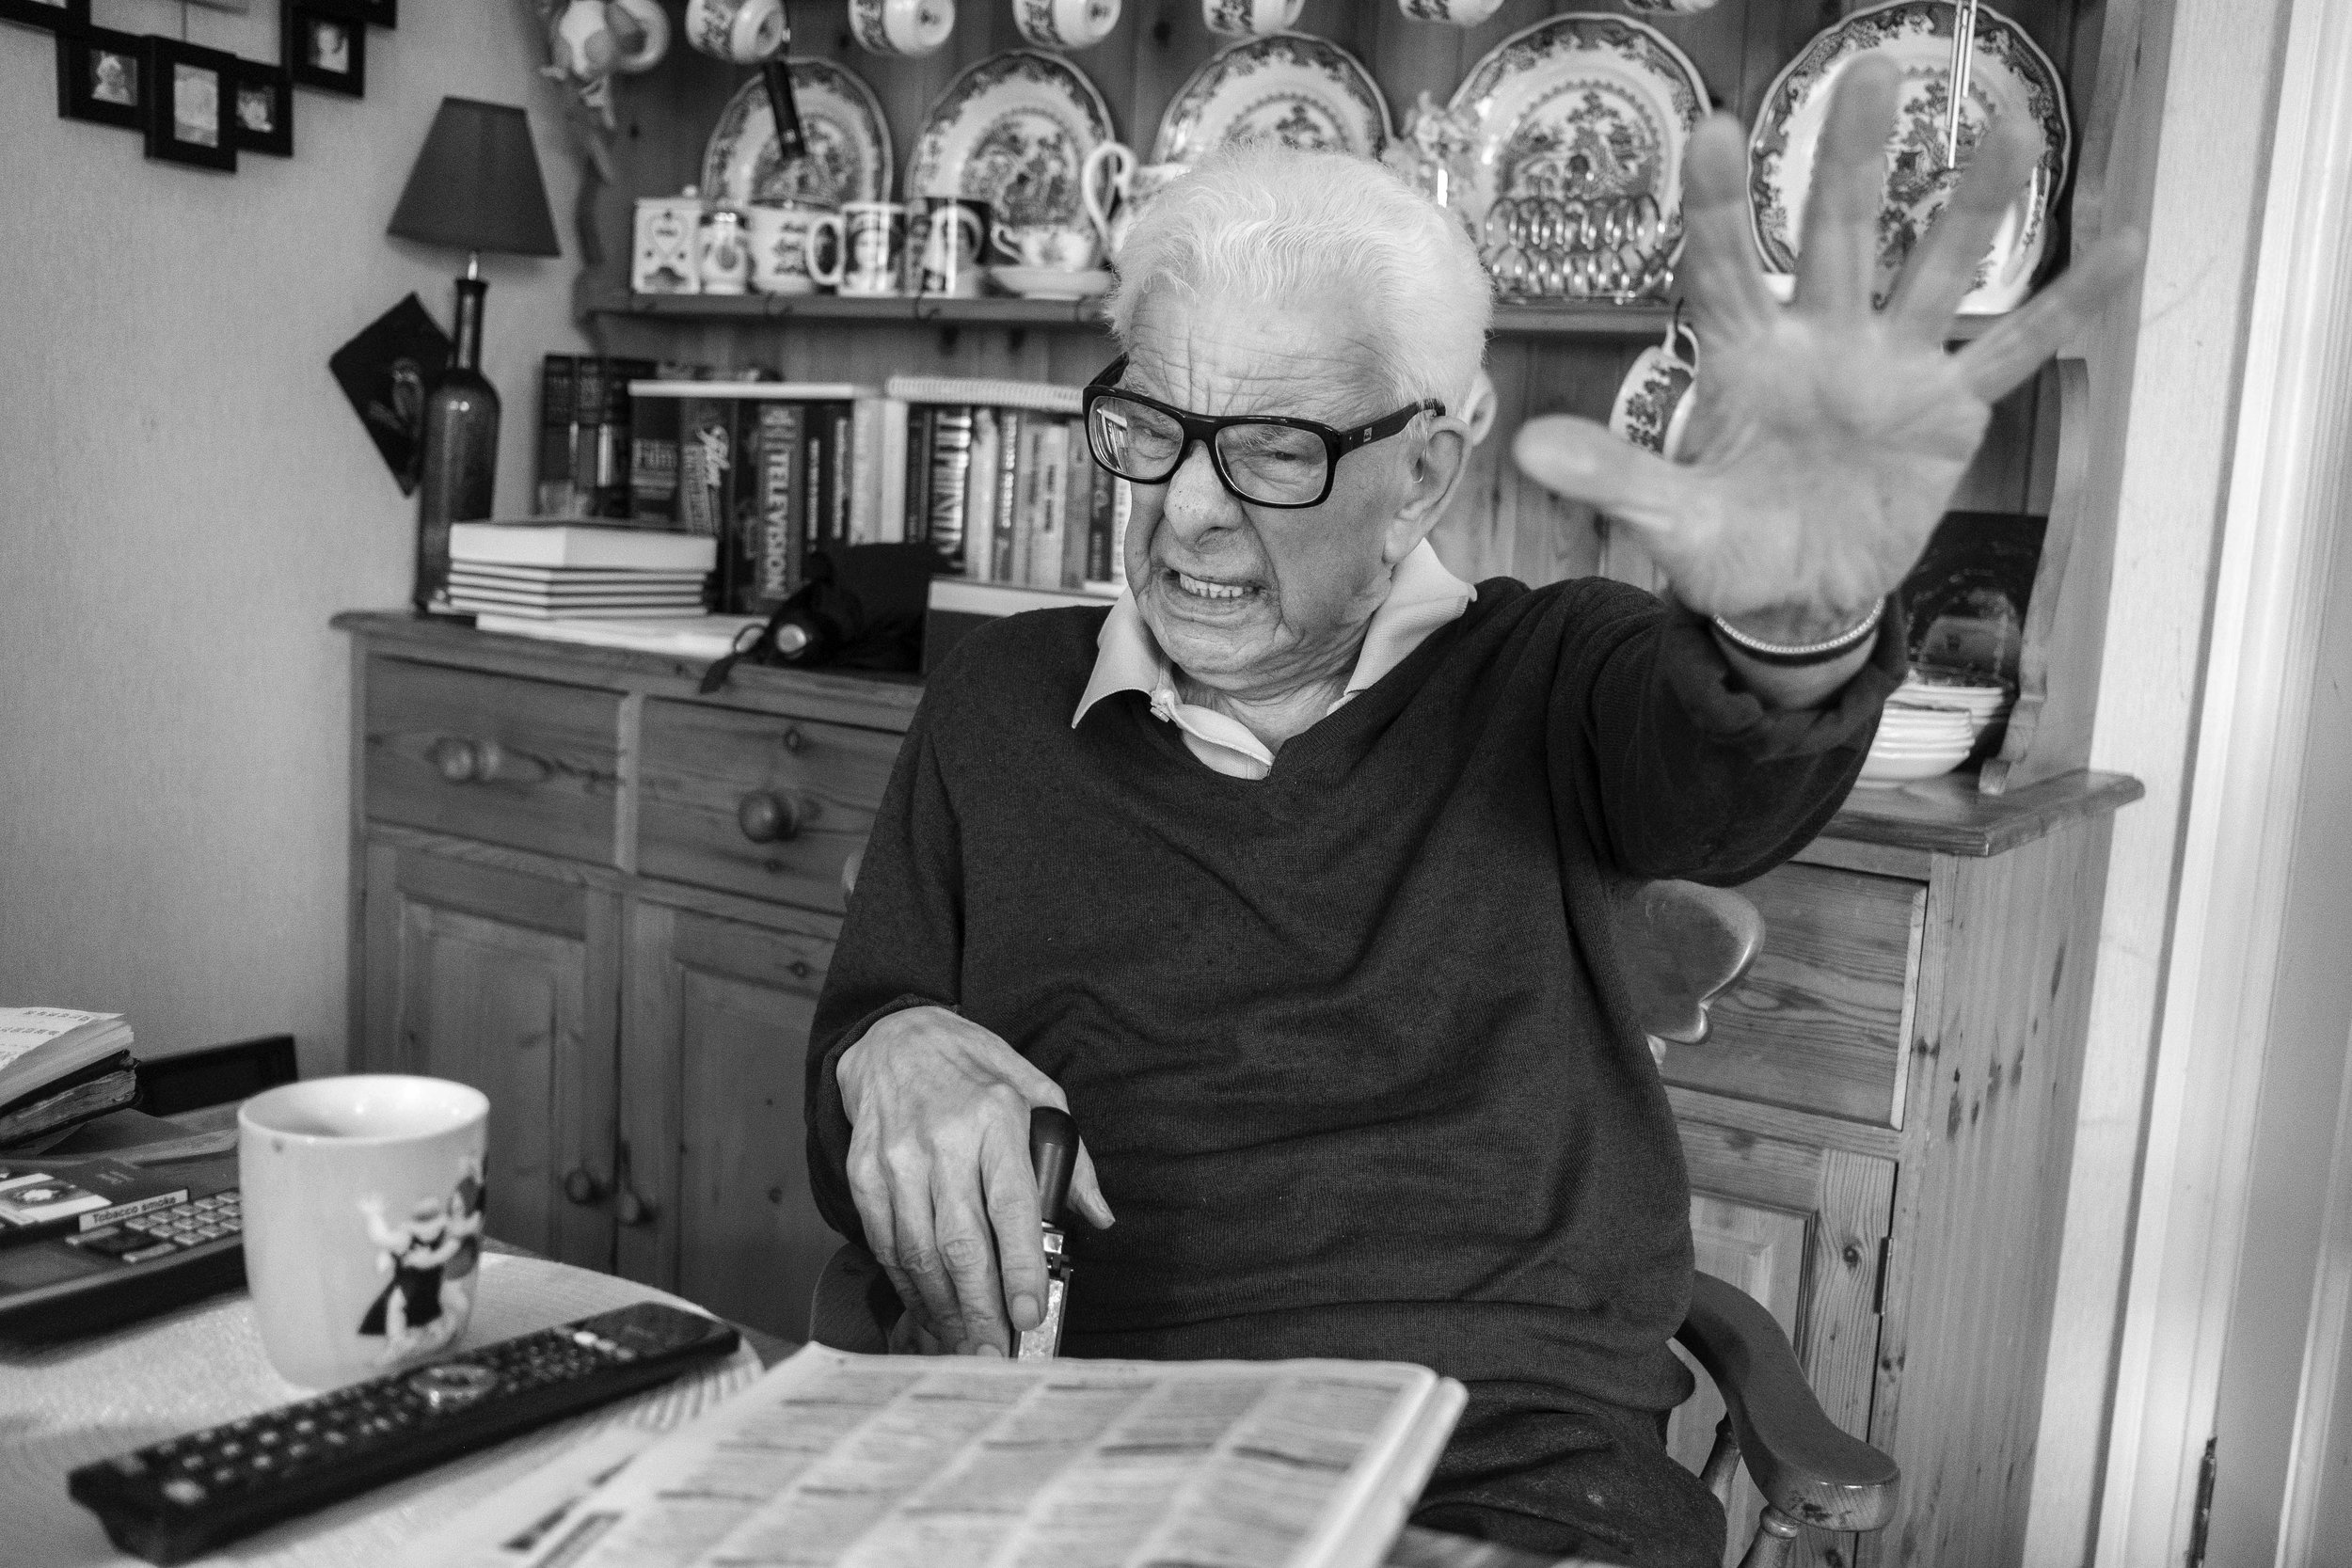  Barry Cryer demonstrates how he fends off the Paparazzi.
Photo by Julian Simmonds, 28 March 2019
 